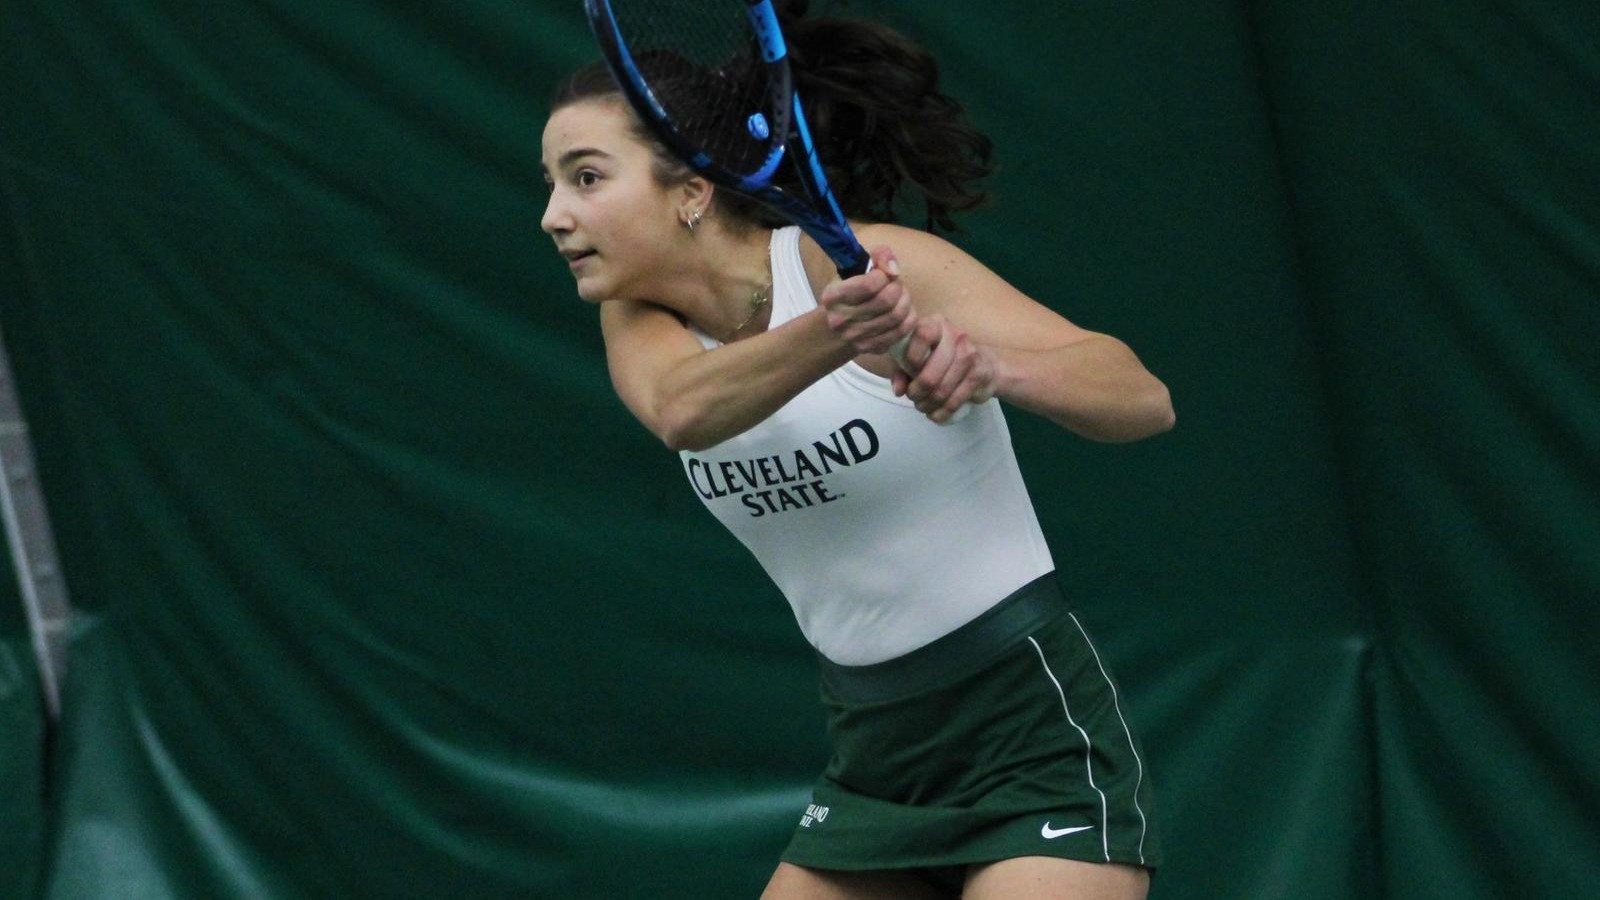 Cleveland State Women’s Tennis Picks Up 5-2 Victory At IUPUI